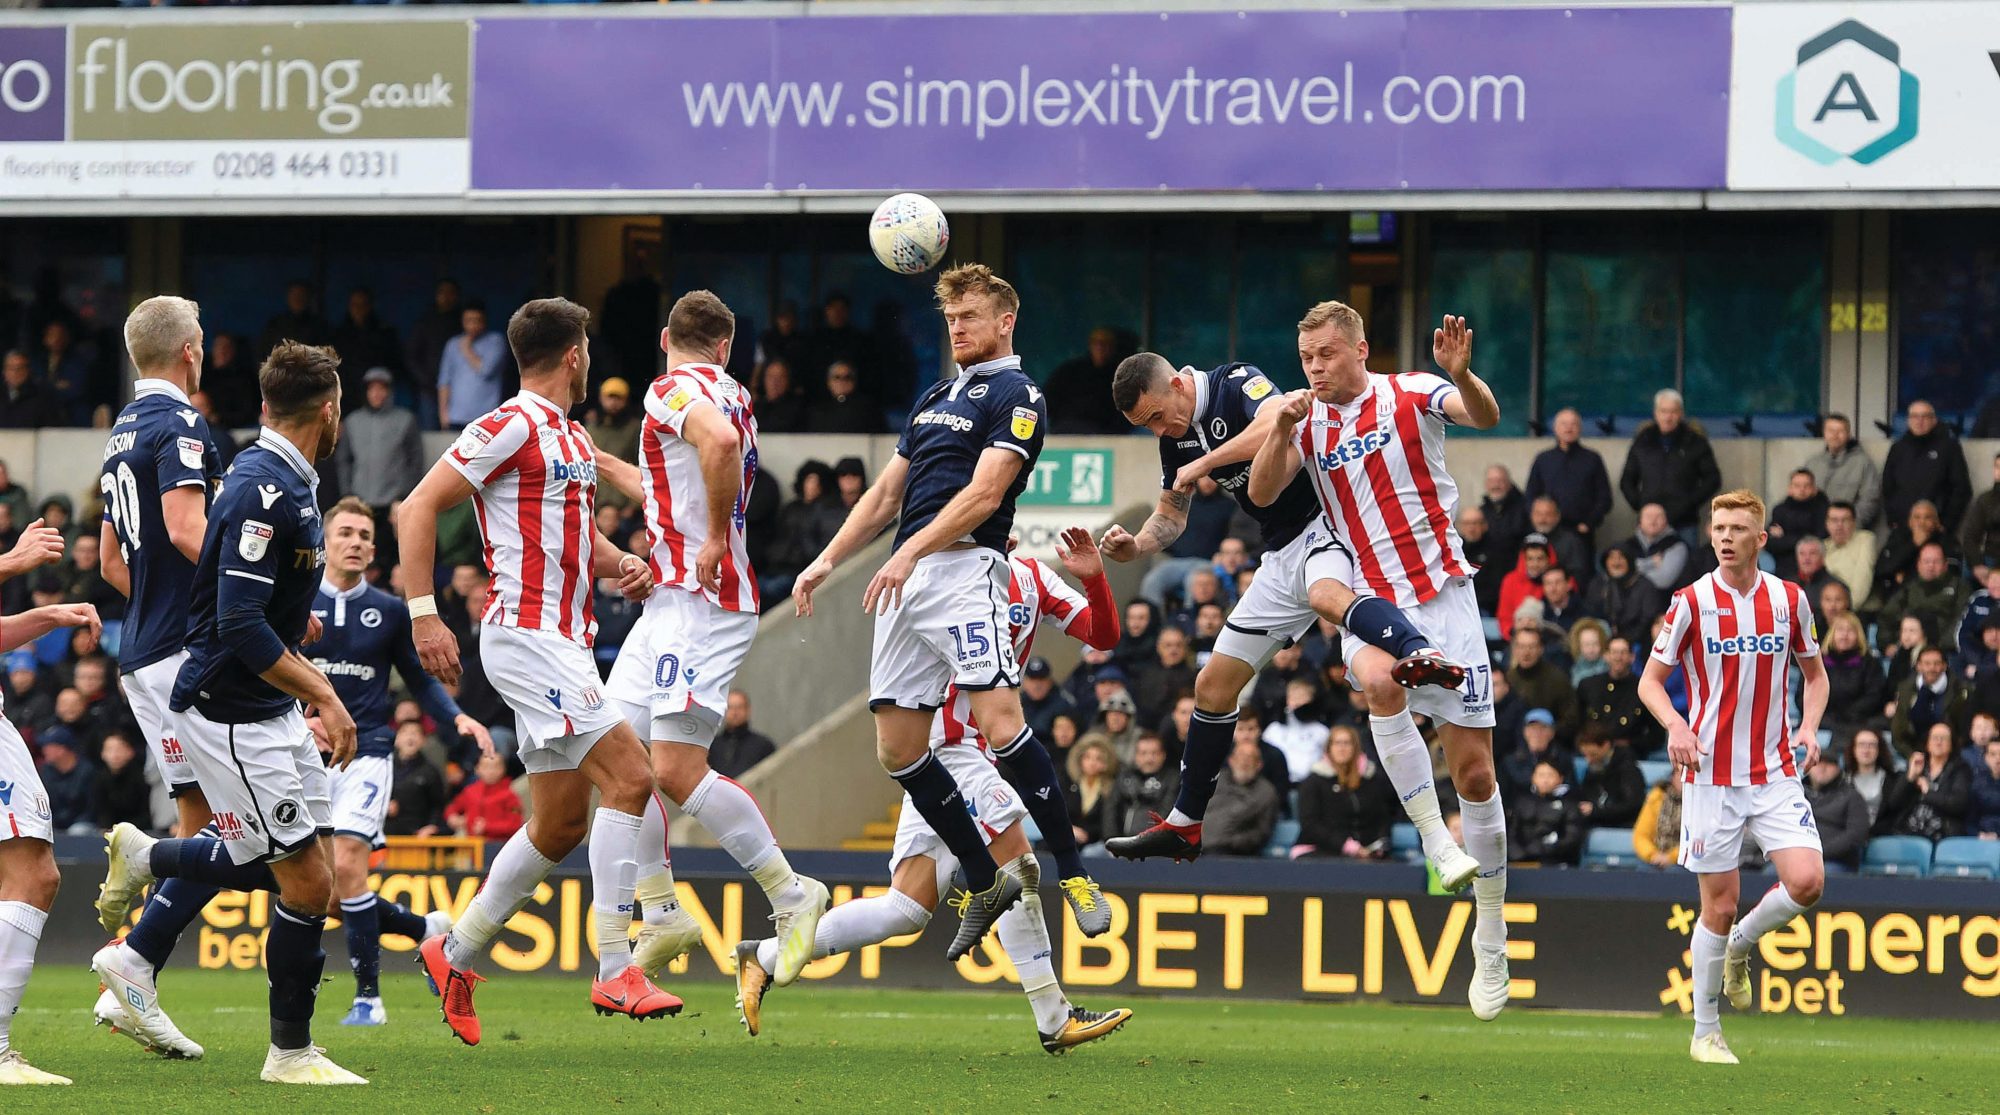 MISSED CHANCES SUMS UP SEASON… 0-0 draw with Stoke City – South London News